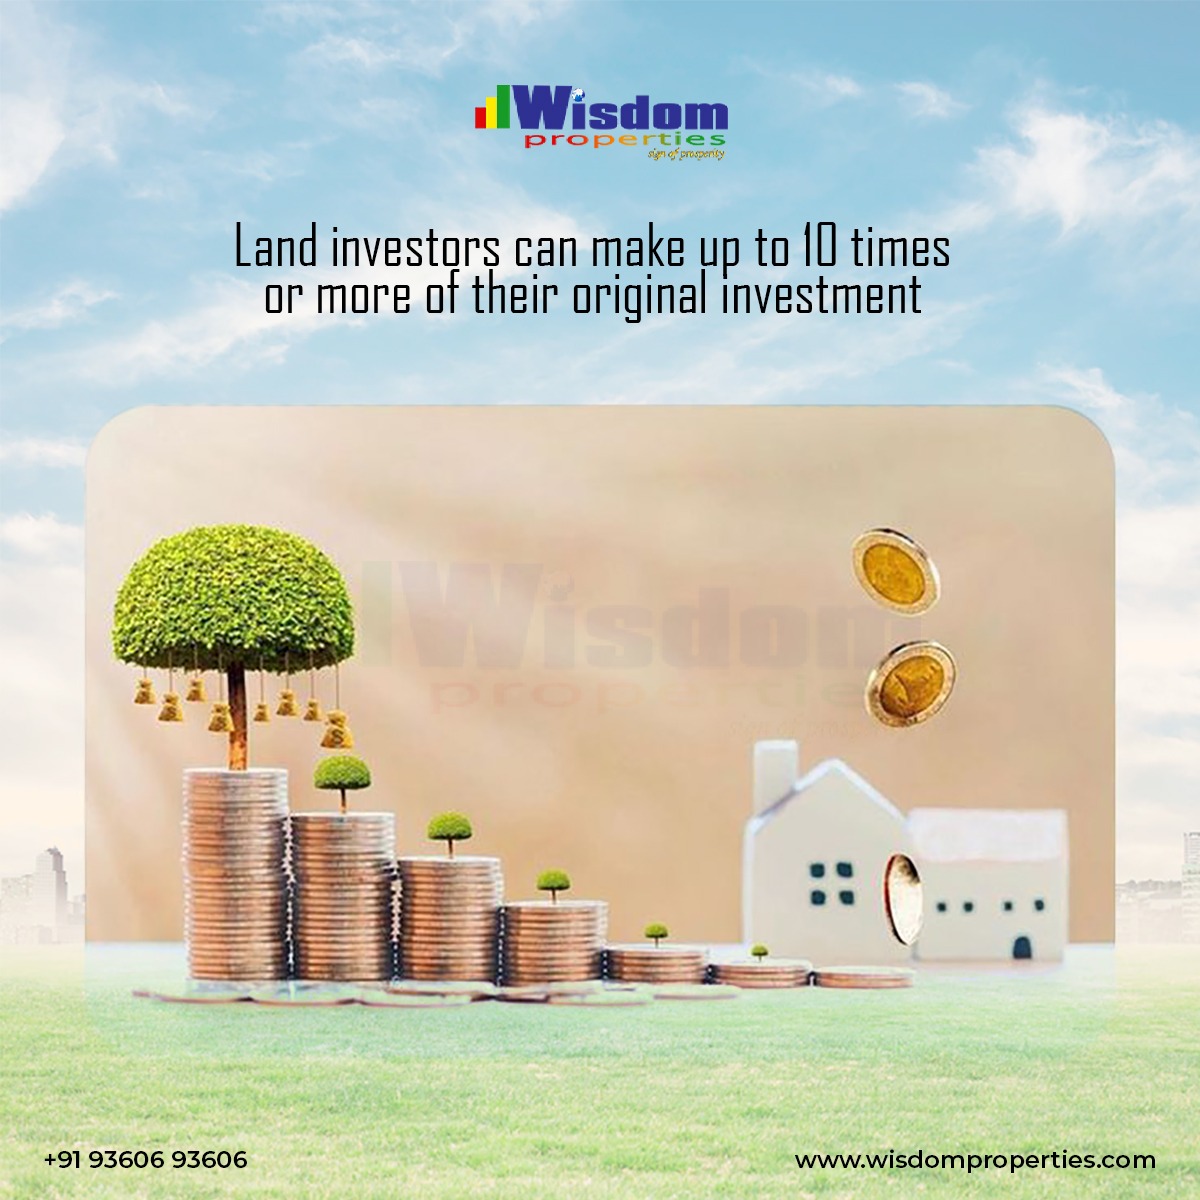 Land investors can make up to 10 times or more of their orginal investment